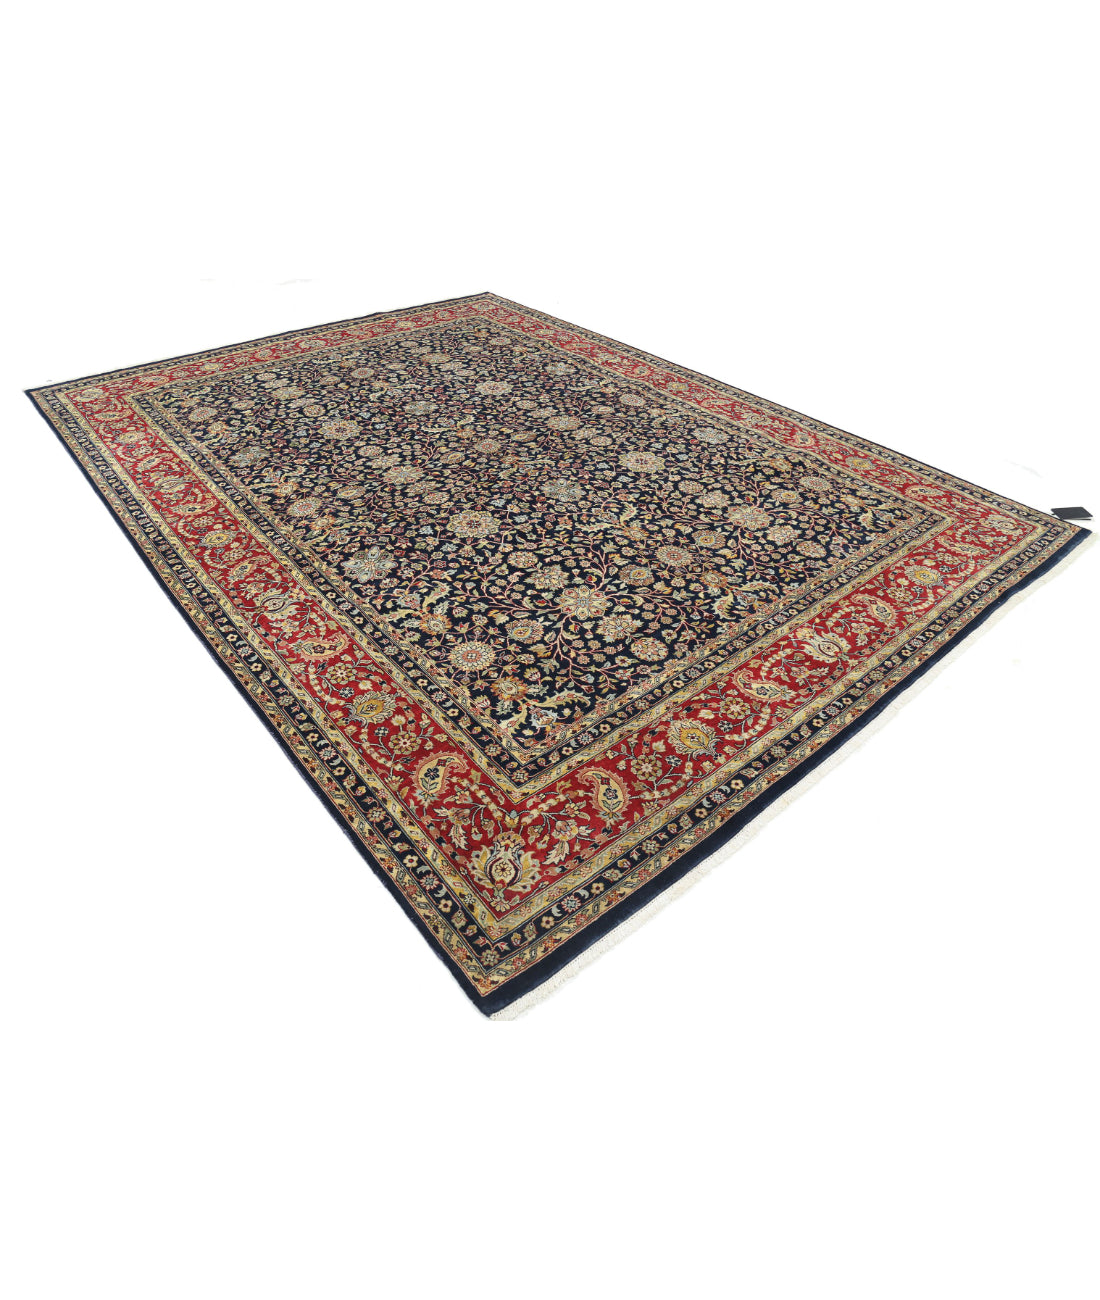 Heritage 8'9'' X 11'11'' Hand-Knotted Wool Rug 8'9'' x 11'11'' (273 X 368) / Blue / Red